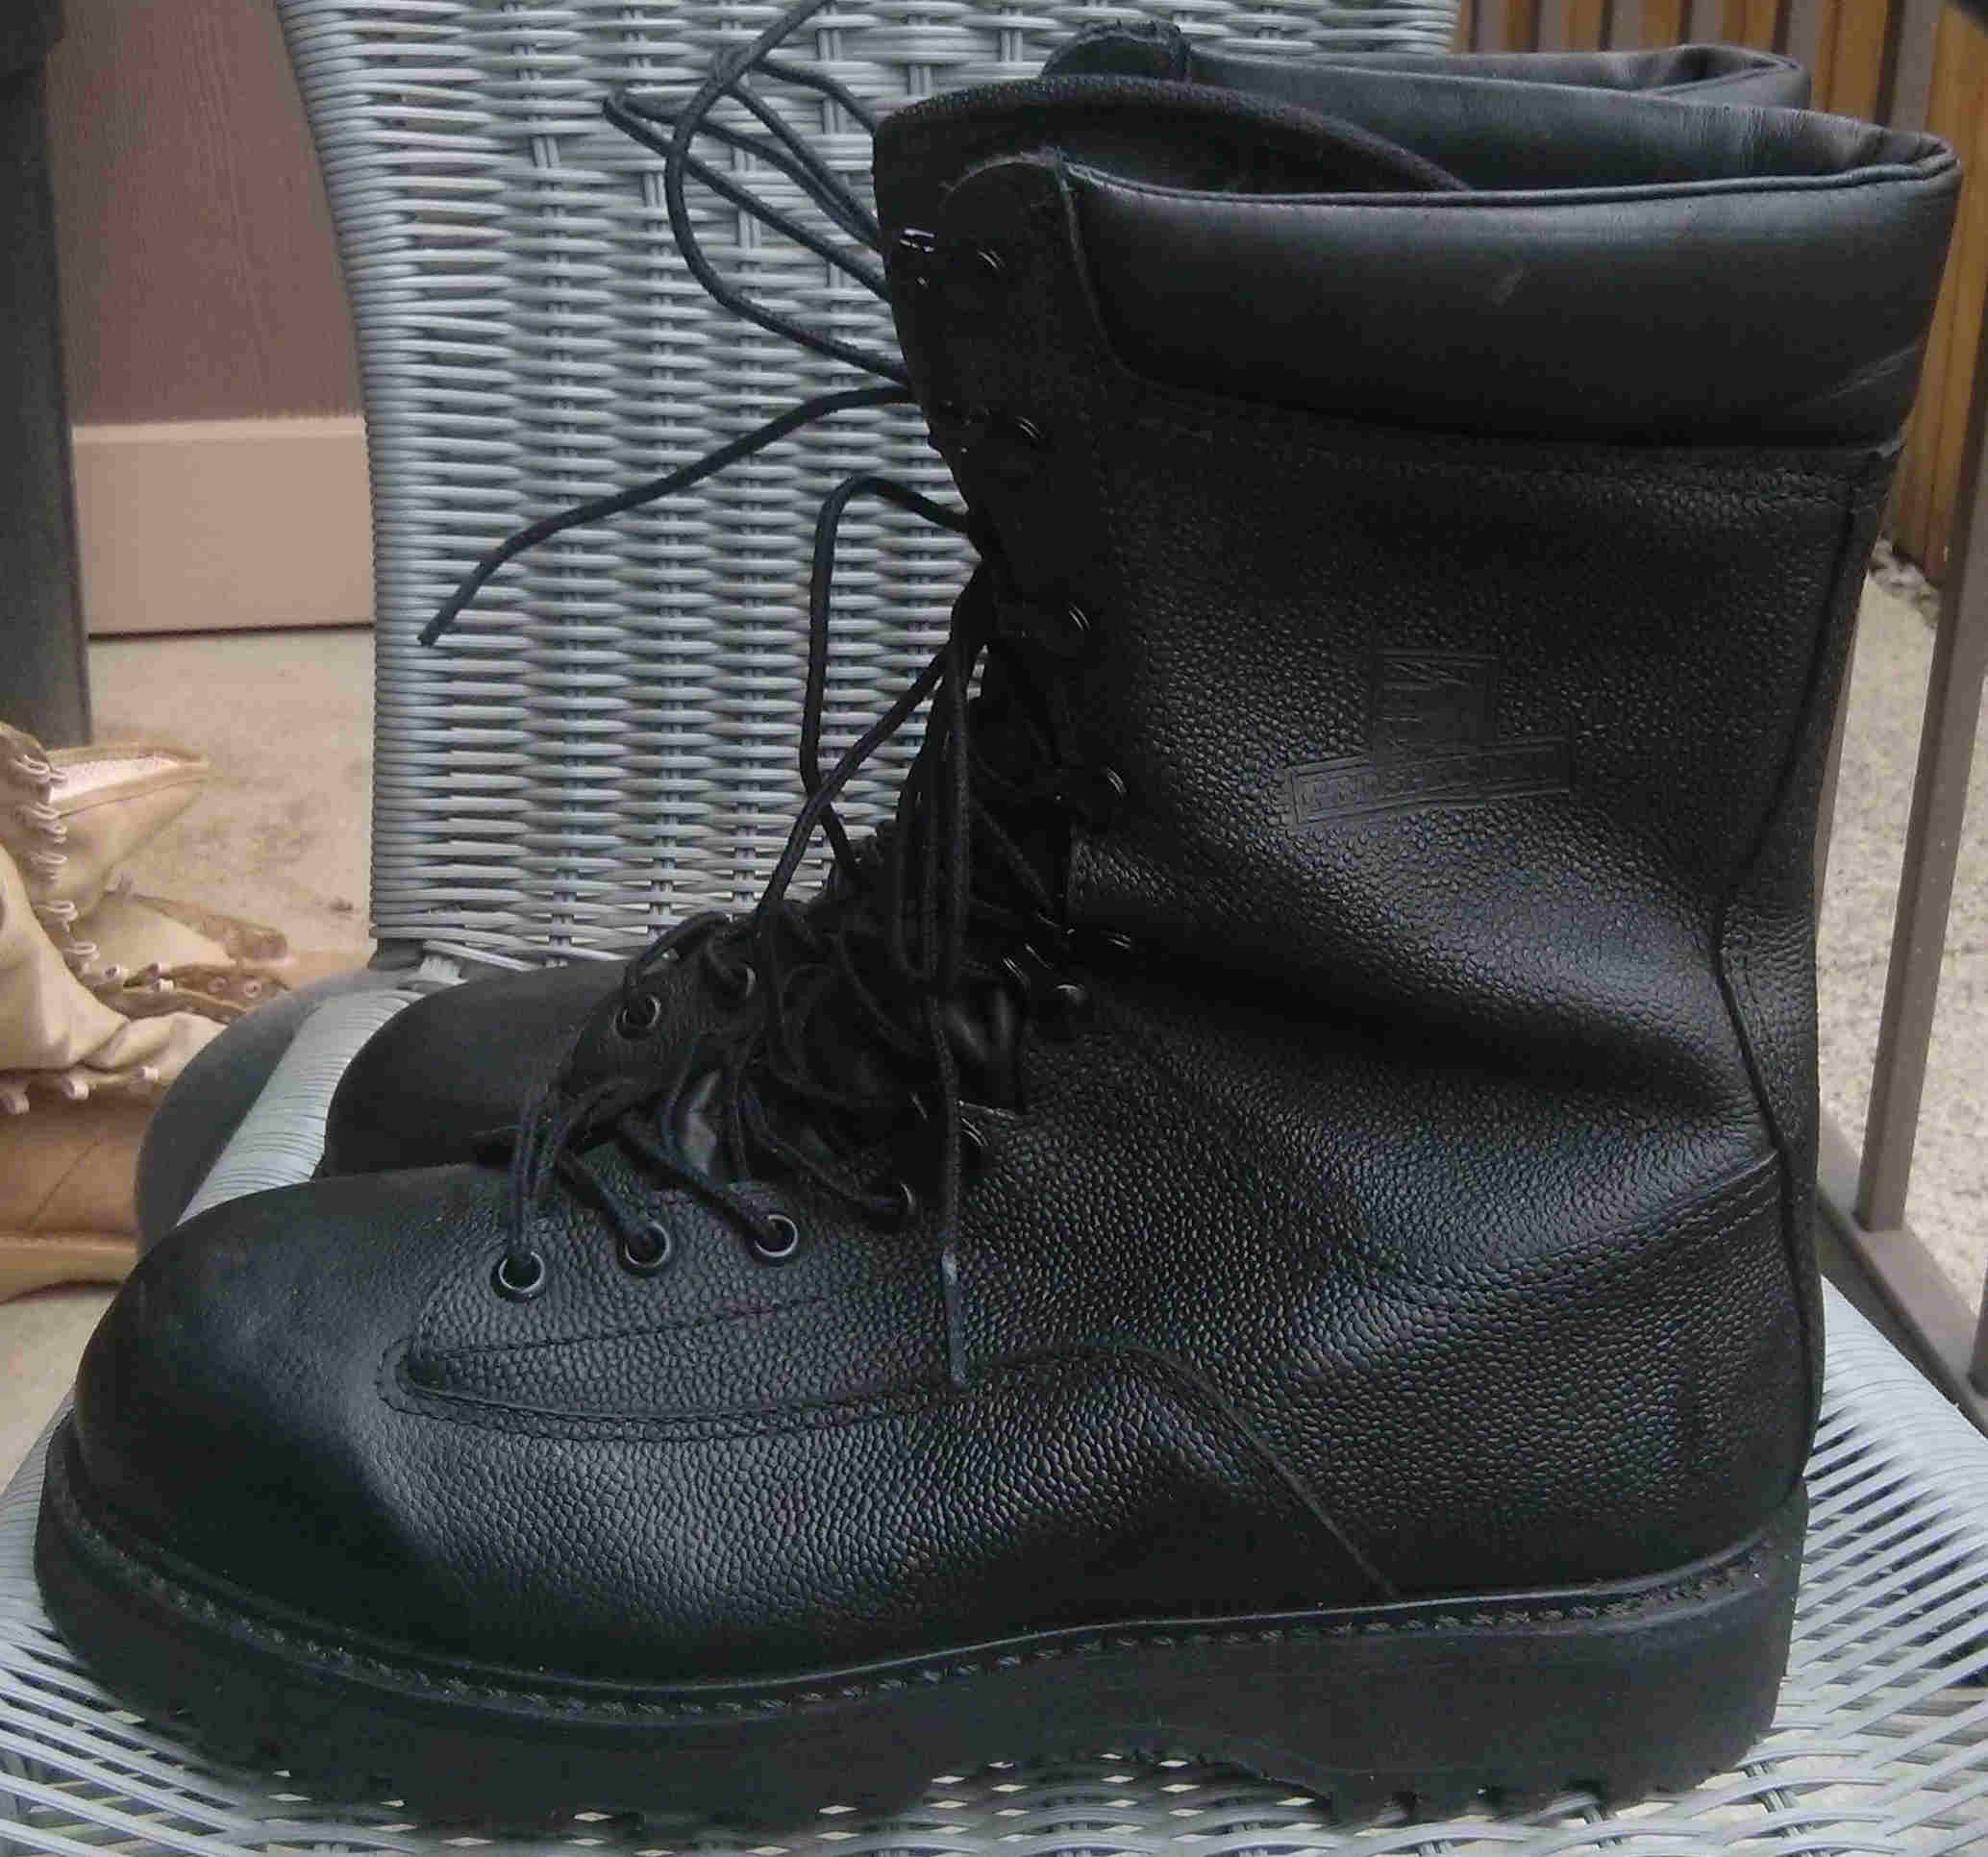 canadian army boots for sale